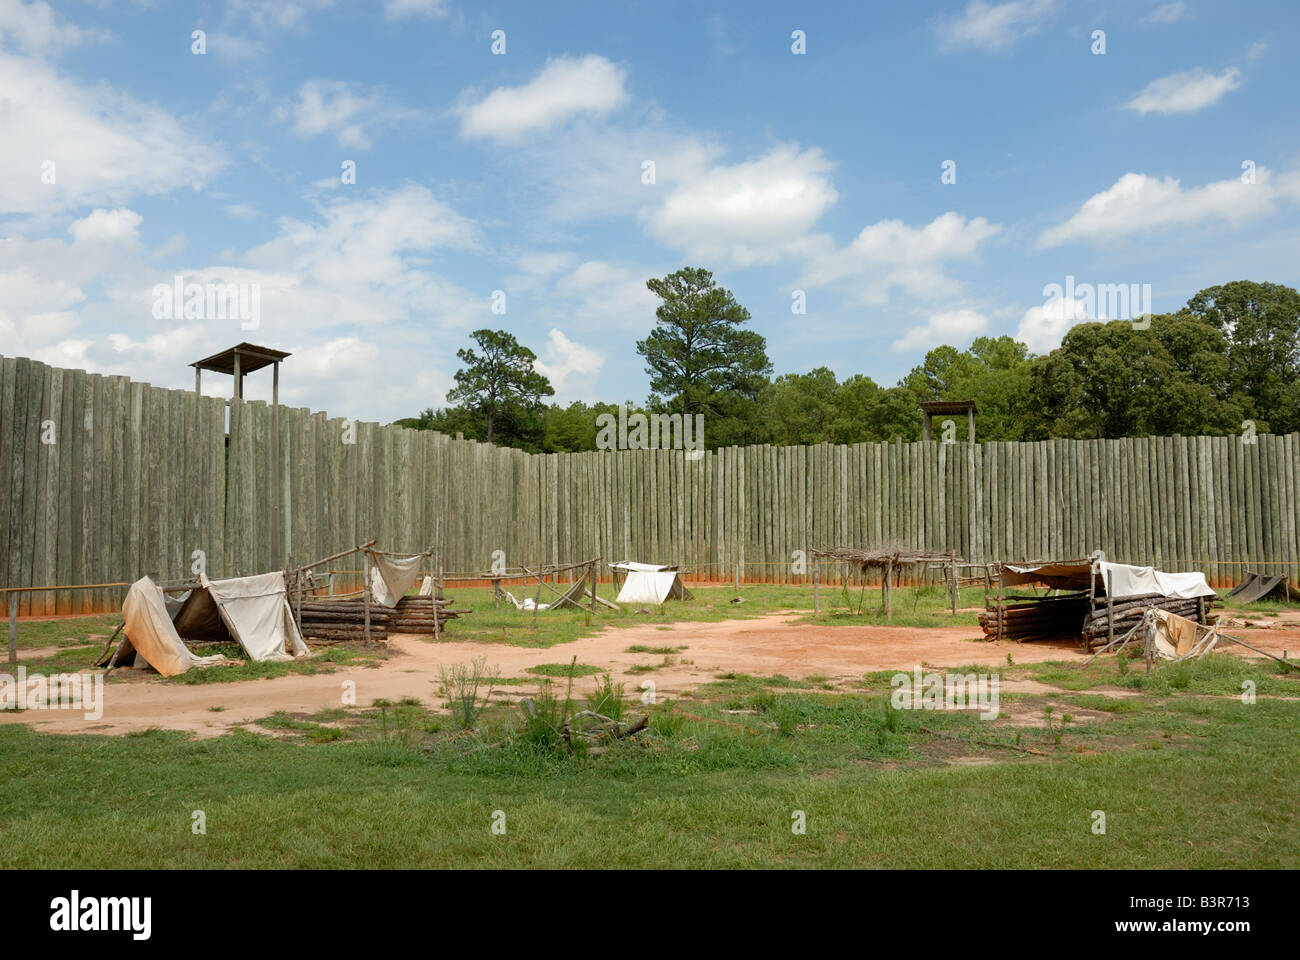 Replica of living conditions at Camp Sumter Stock Photo